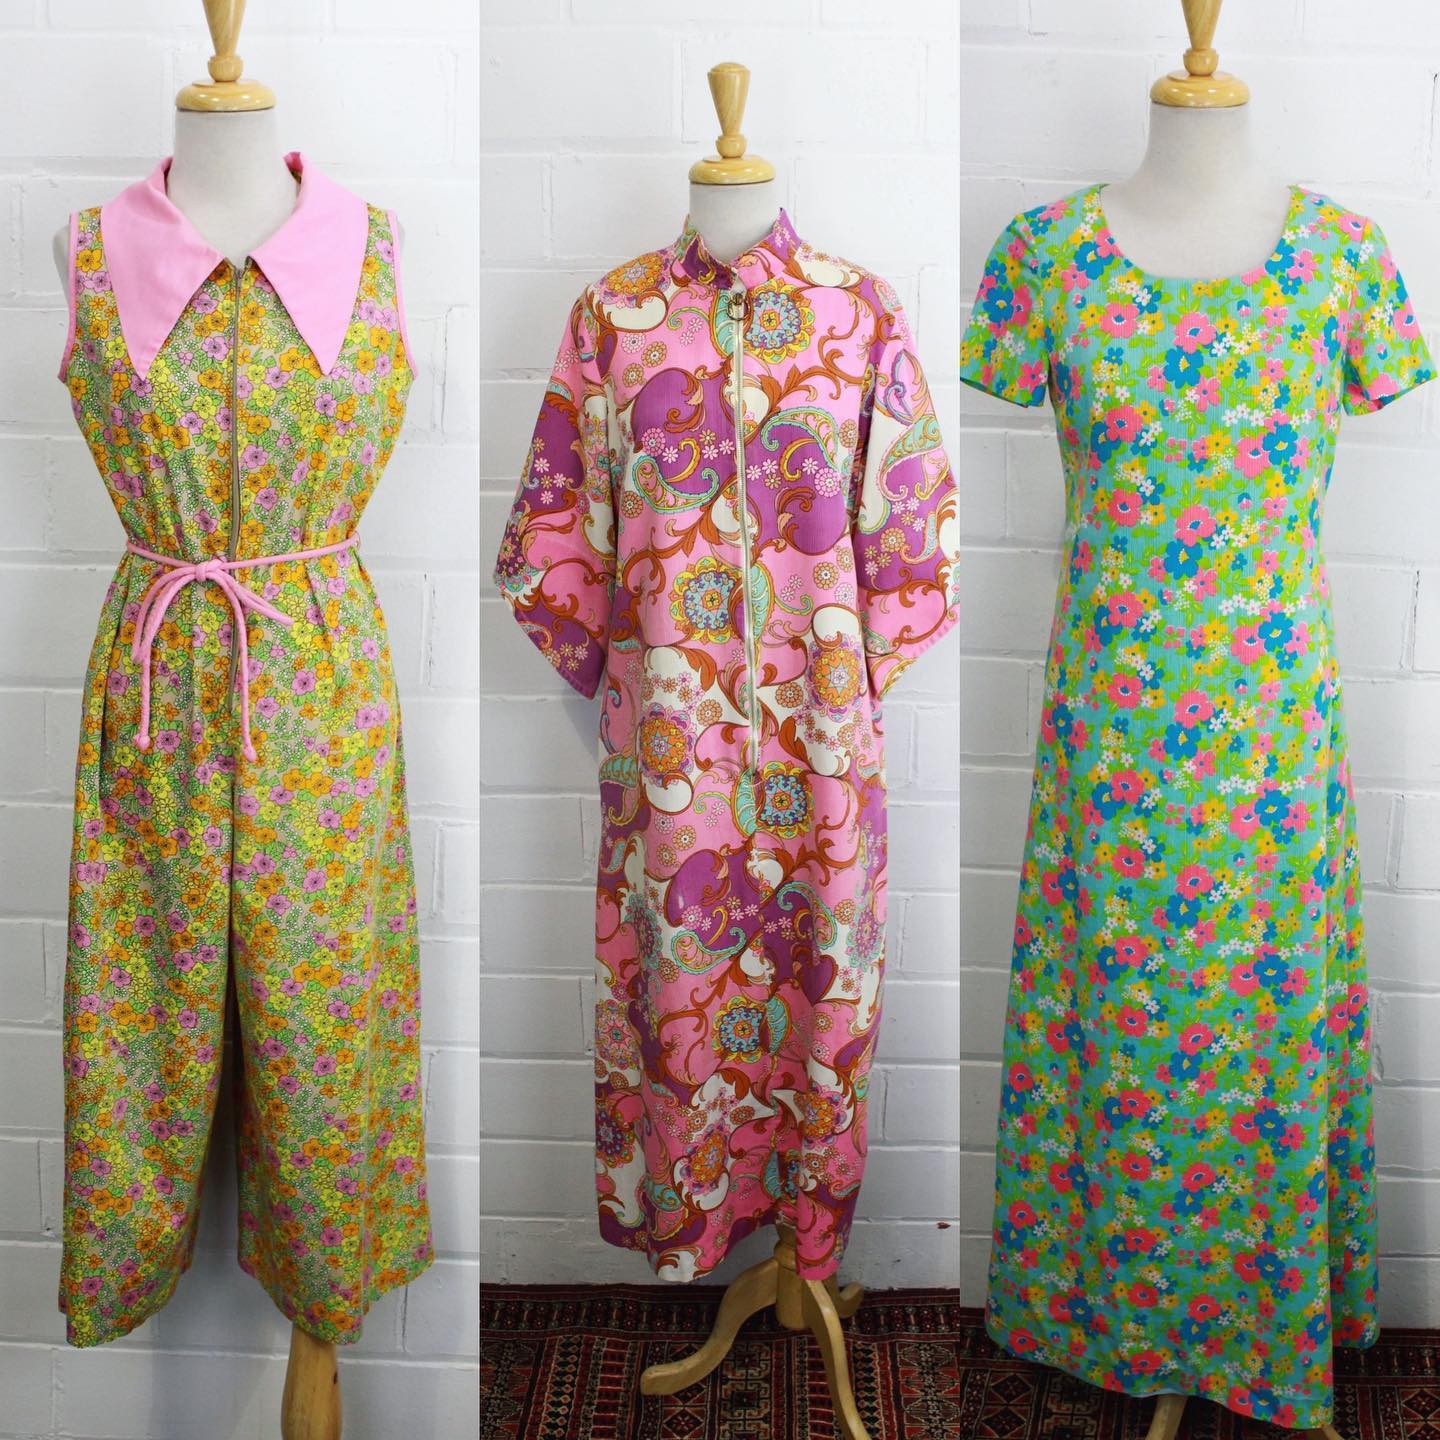 These three sweet 60s pieces have just been listed on Etsy and Shopify! Link in bio or click to shop!
.
.
.
#curatedvintage #vintagefashion #vintageclothing #vintageshop #vintageshopping #1970svintage #1960svintage #60sfashion #70sfashion #1970sfashion #1960sfashion #1970sclothing #vintagecommunity #vintagecommunityforsale #sustainablefashion #vintagestyle #vintagejumpsuit #vintagedress #1960s #1970s